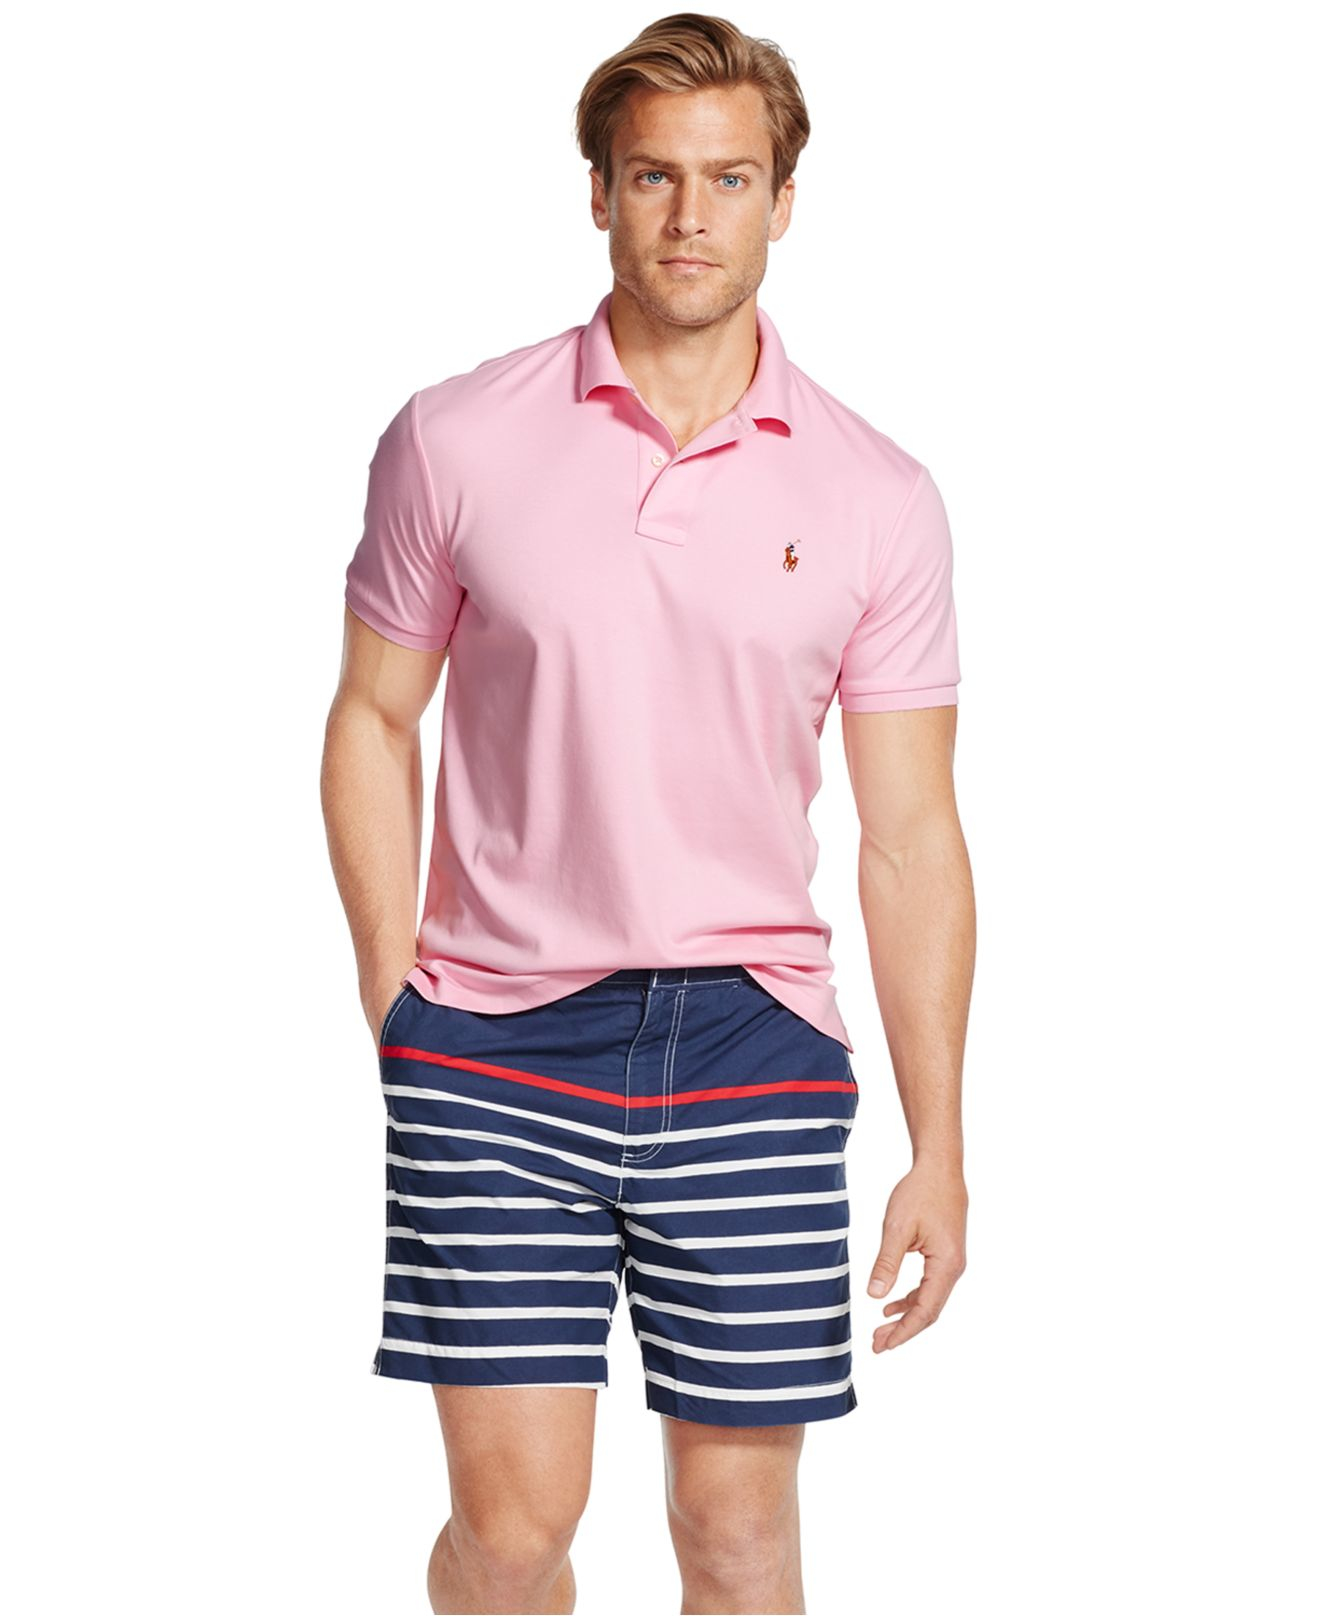 Polo Ralph Lauren Cotton Pima Soft-touch Shirt in Pink for Men - Lyst